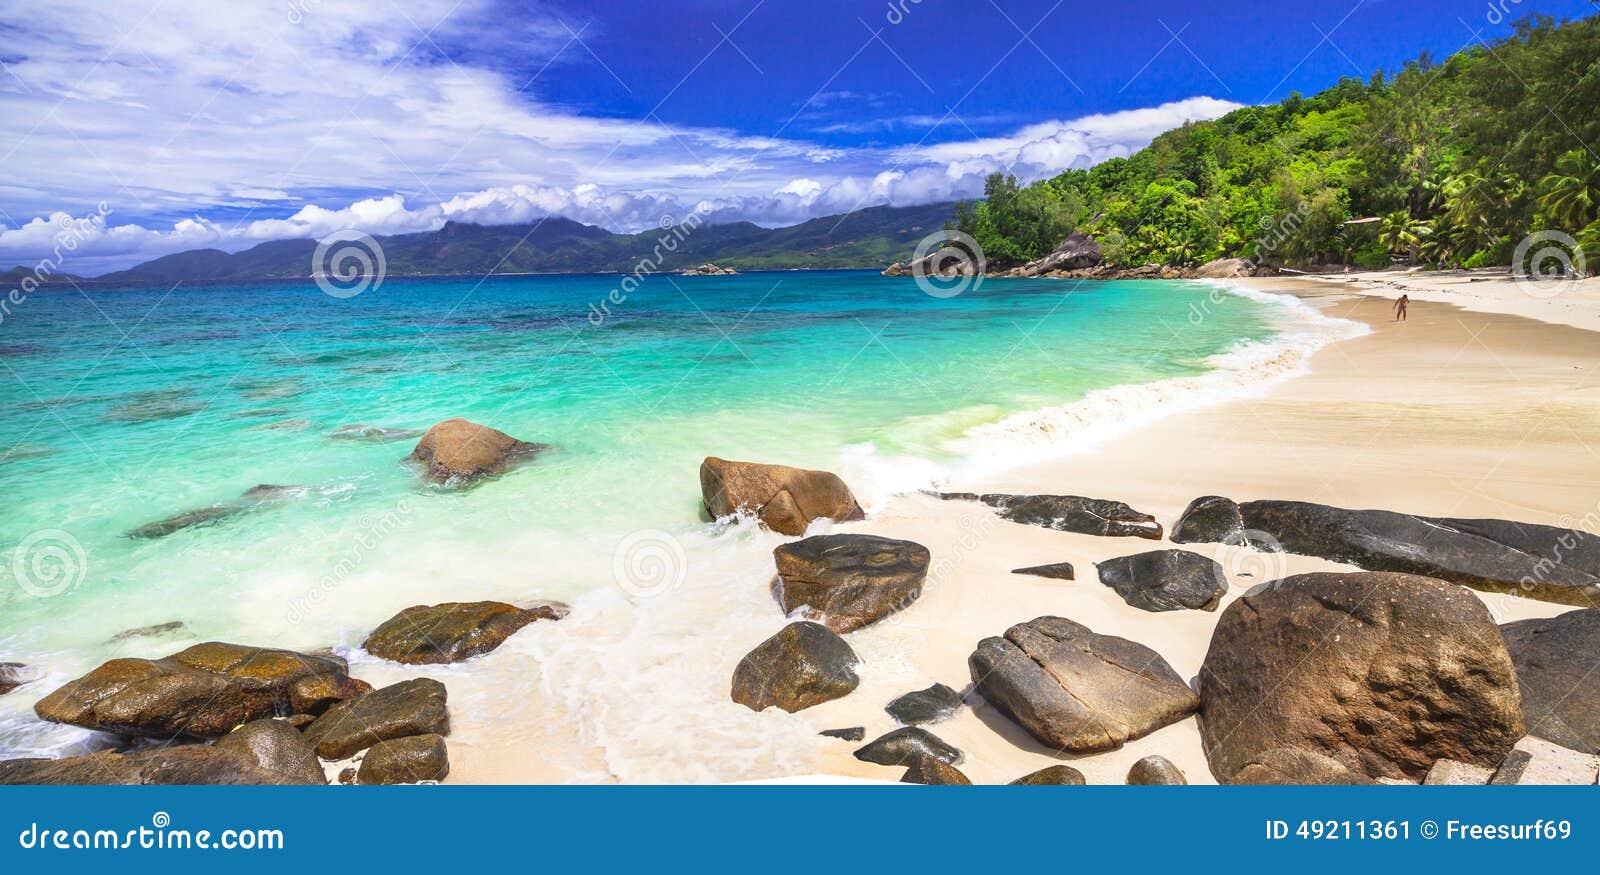 Beaches of Seichelles stock image. Image of rock, island - 49211361